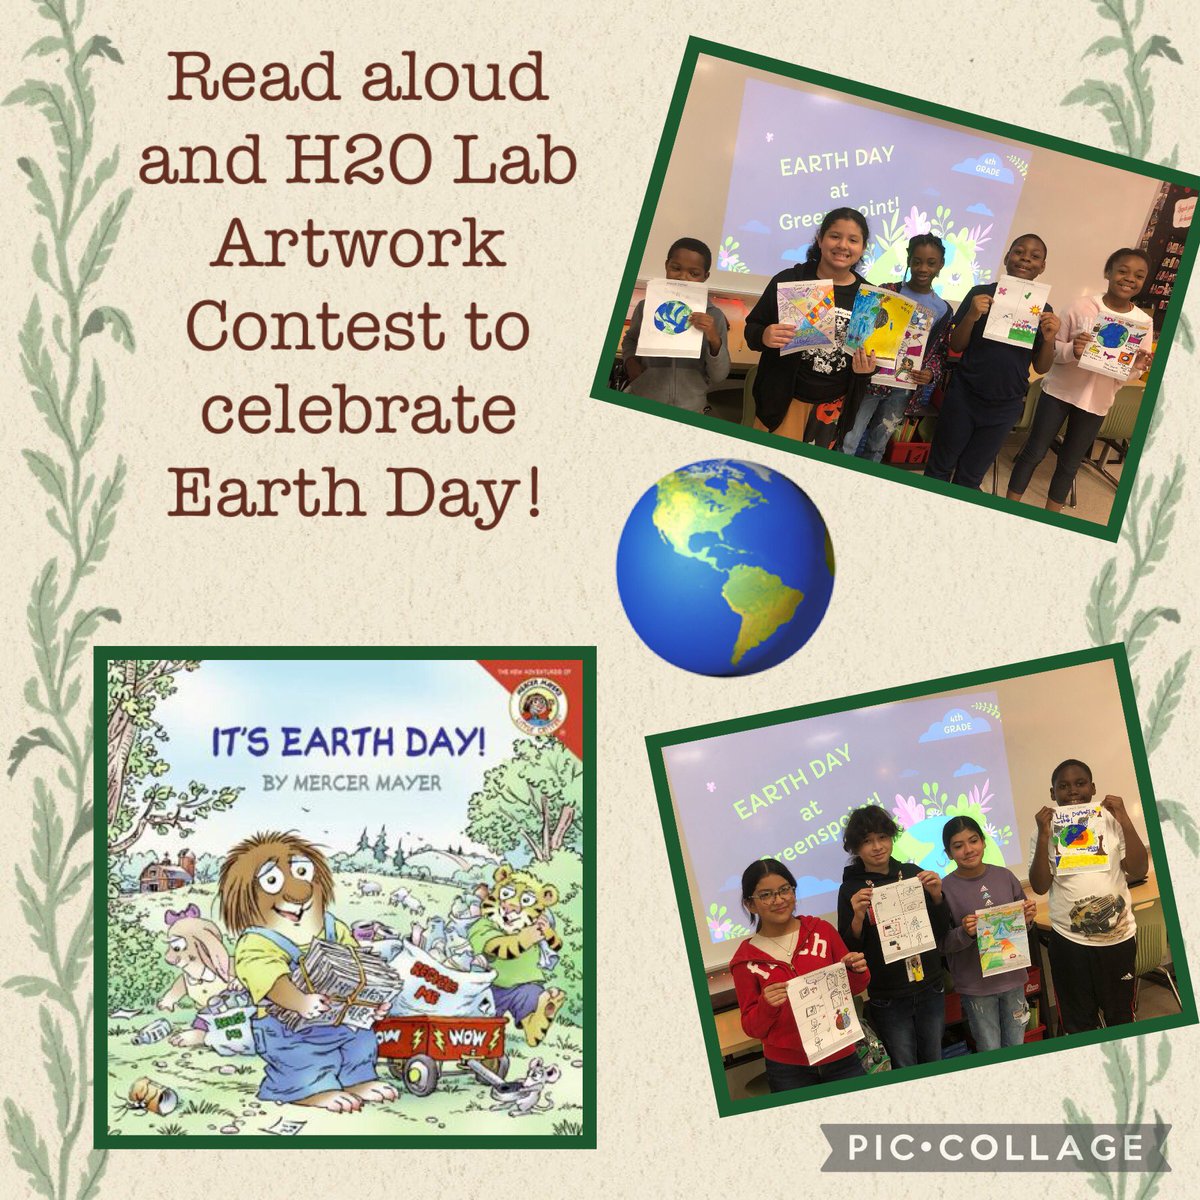 We’ve been celebrating 🌎 Day all month long thanks to @hg_subsidence who sent Ms. Ma to do a lab on H2O conservation. 💦 Then the kids got to take home their own H2O kits. We wrapped up on 🌎 Day with the H20 artwork contest, video, and read aloud. #EarthDay @GreensptES_AISD